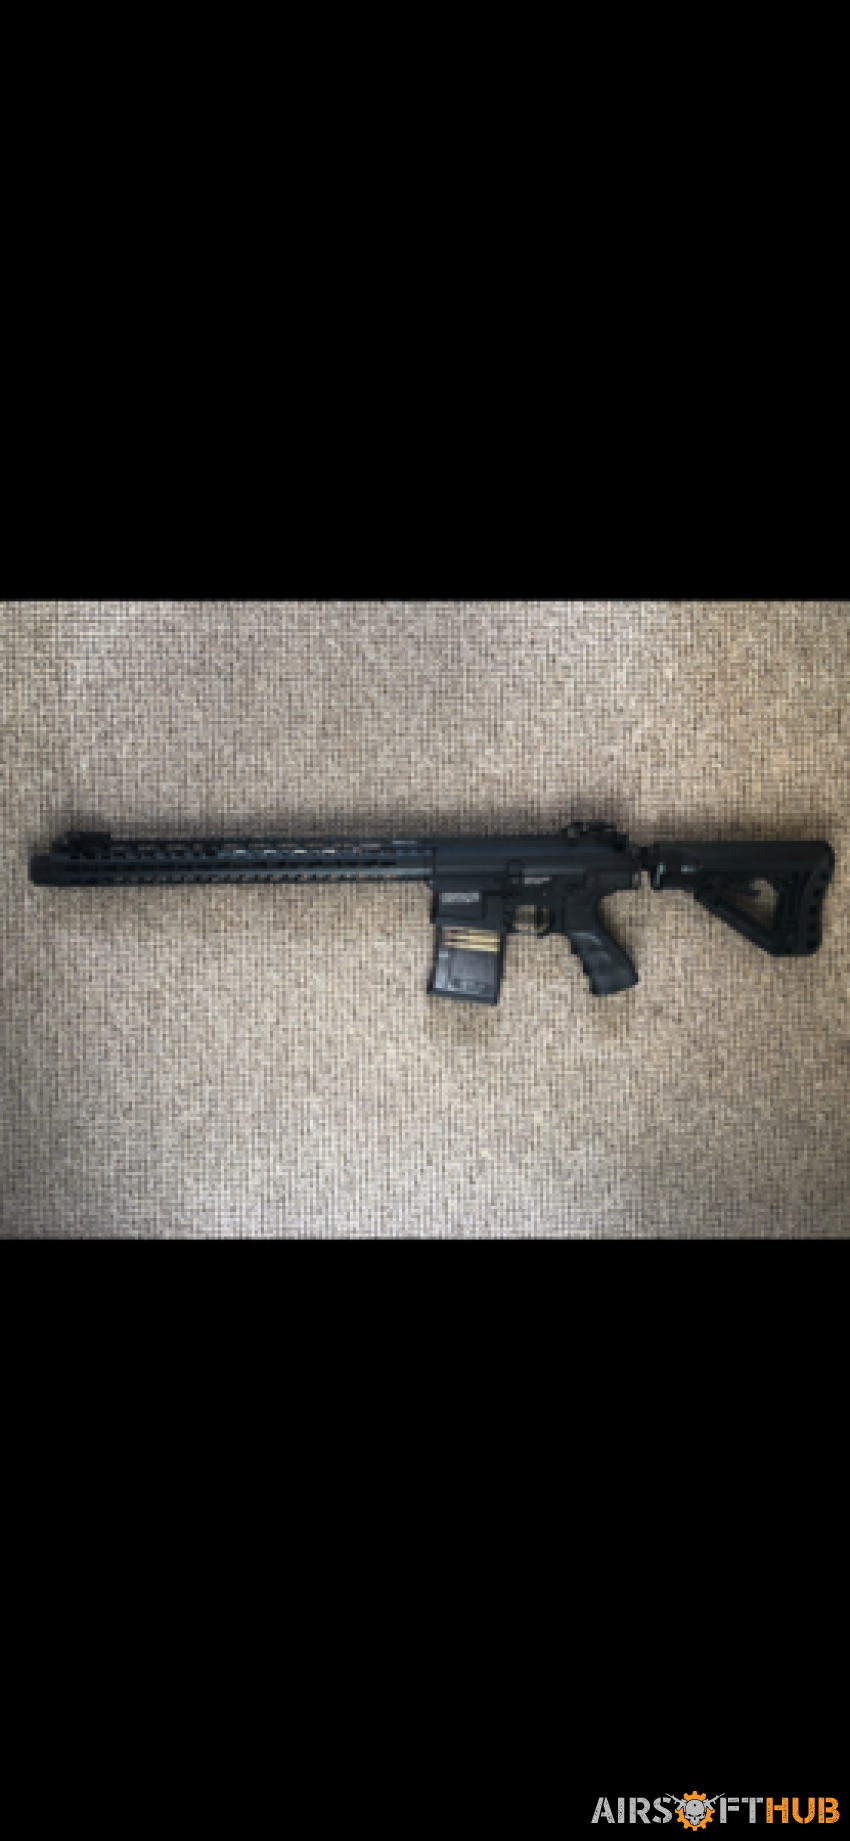 G&G TR16 - Used airsoft equipment